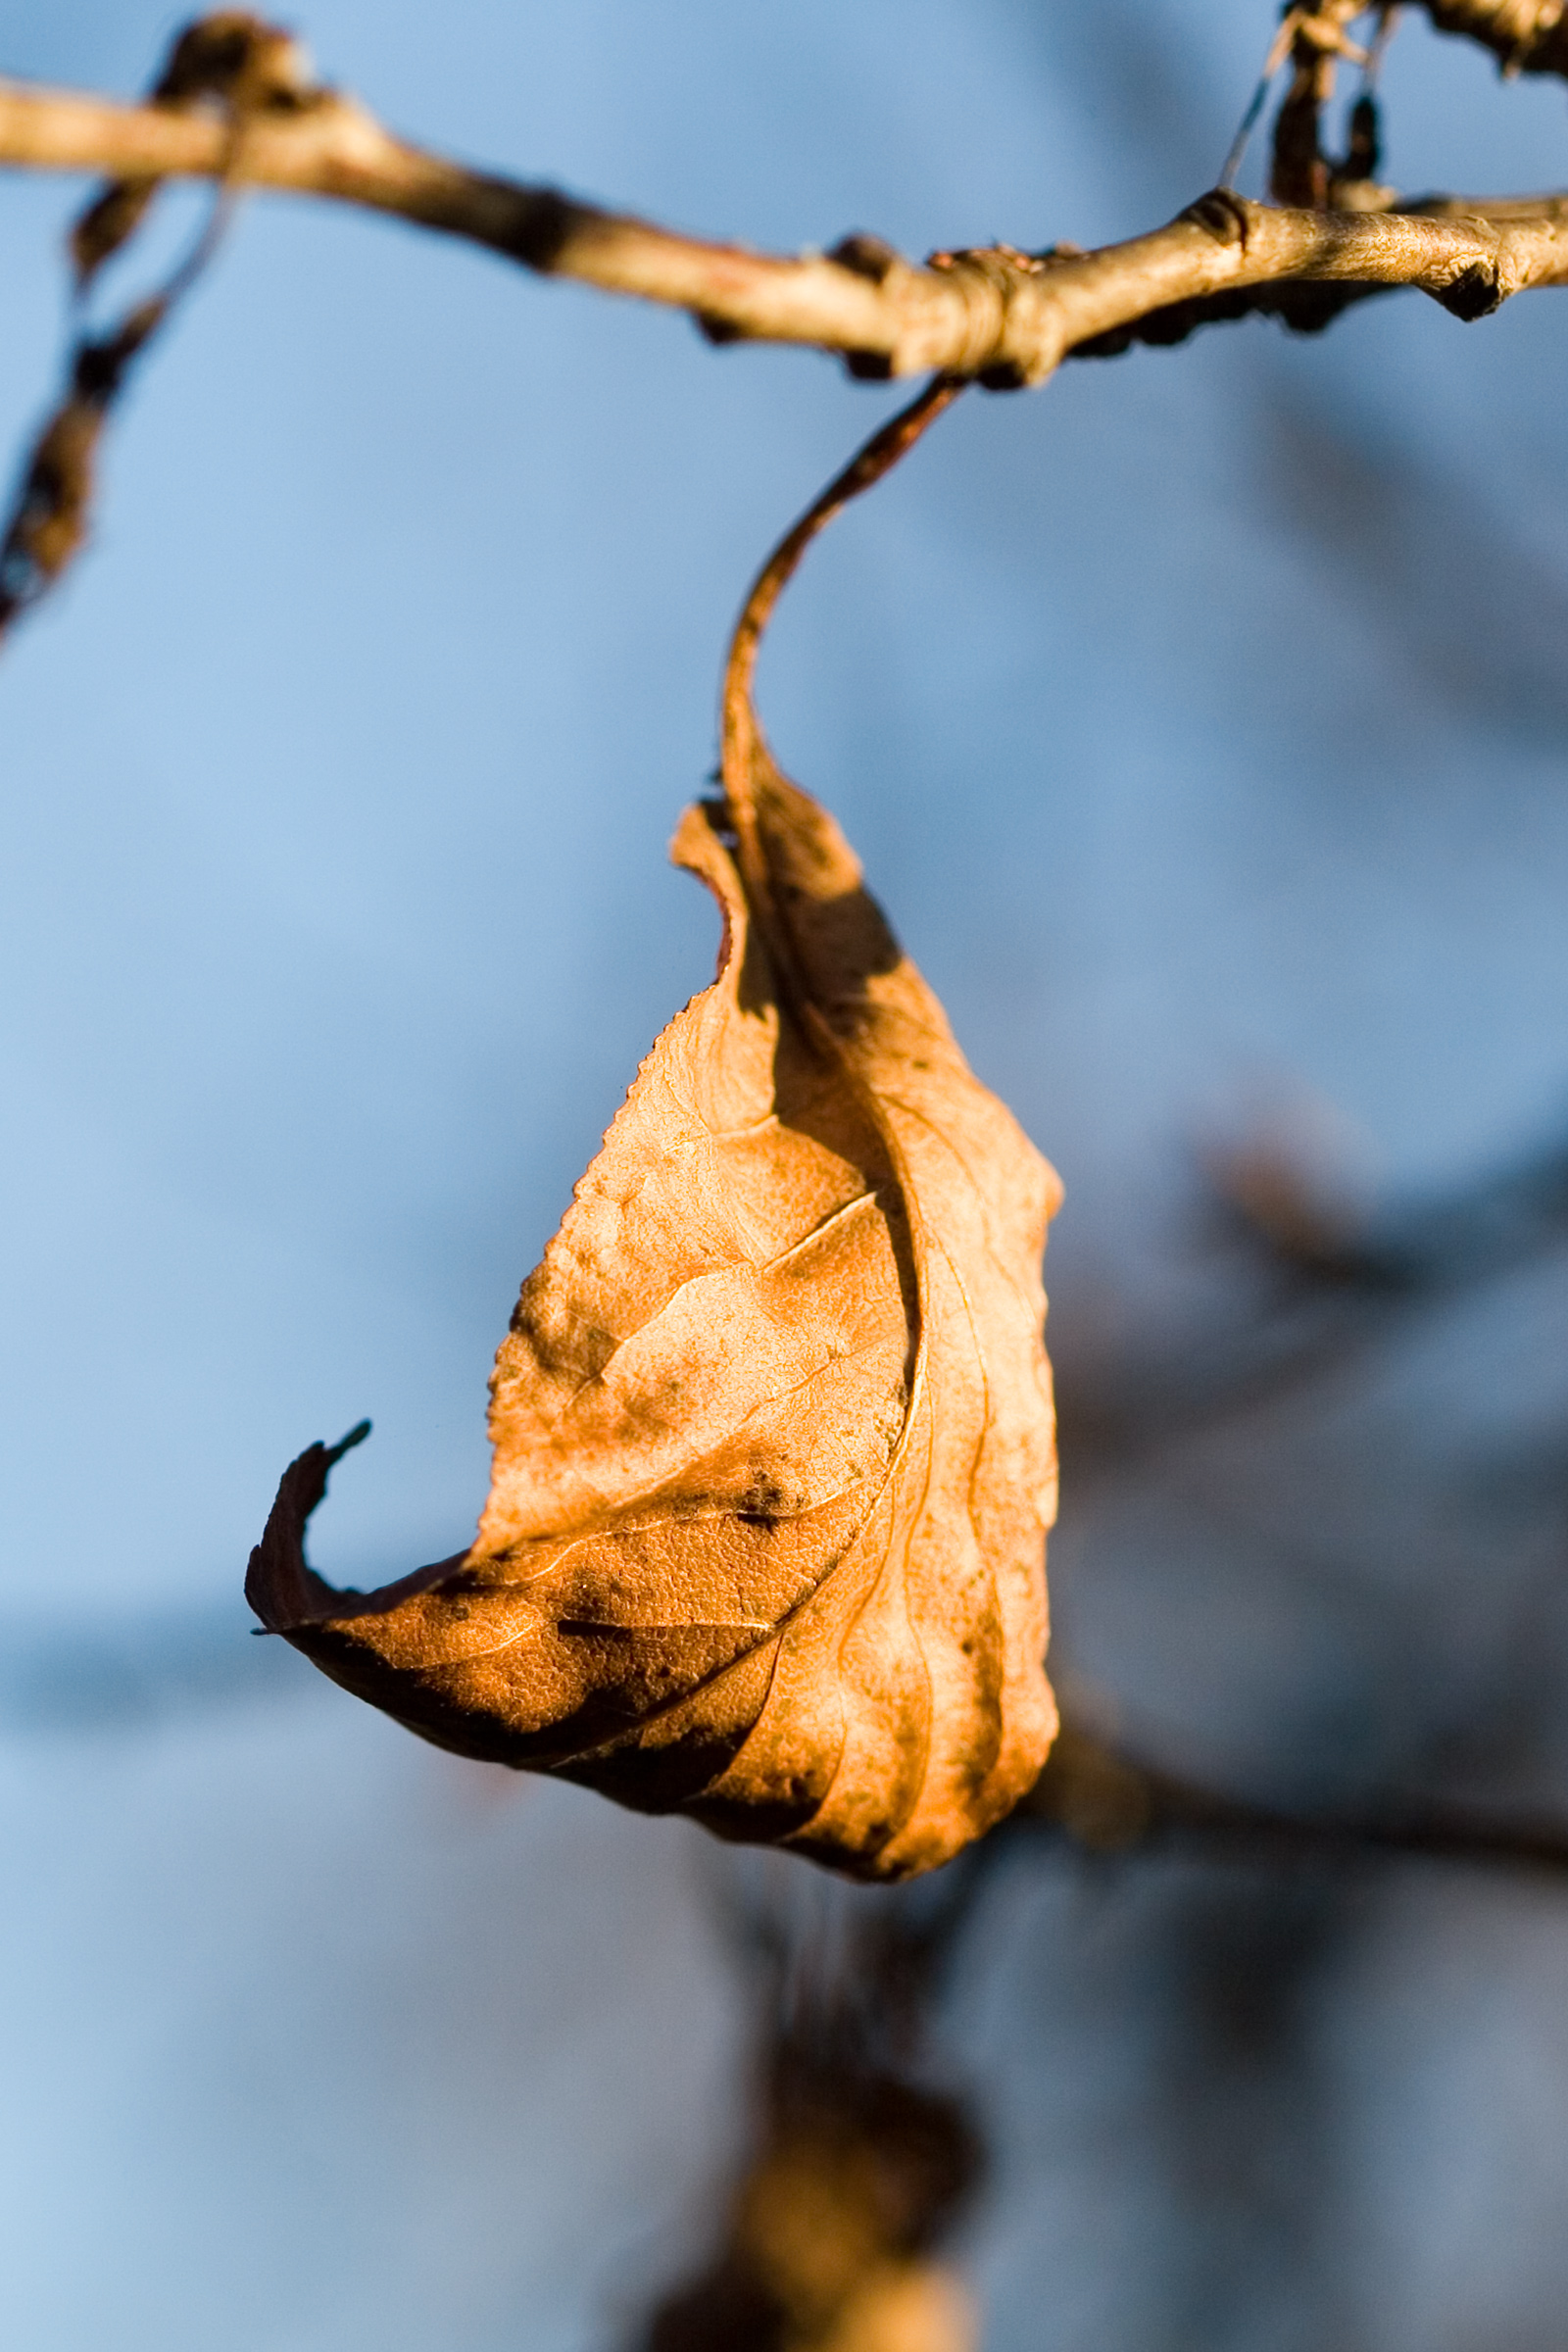 Dead leaf hanging from a branch